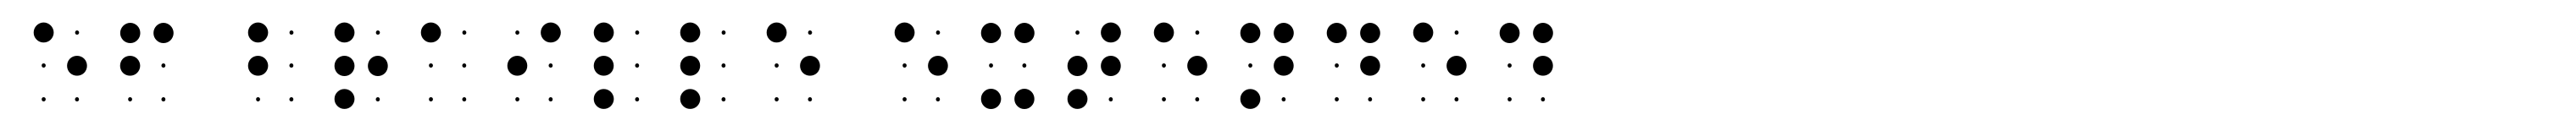 EF Braille Extended